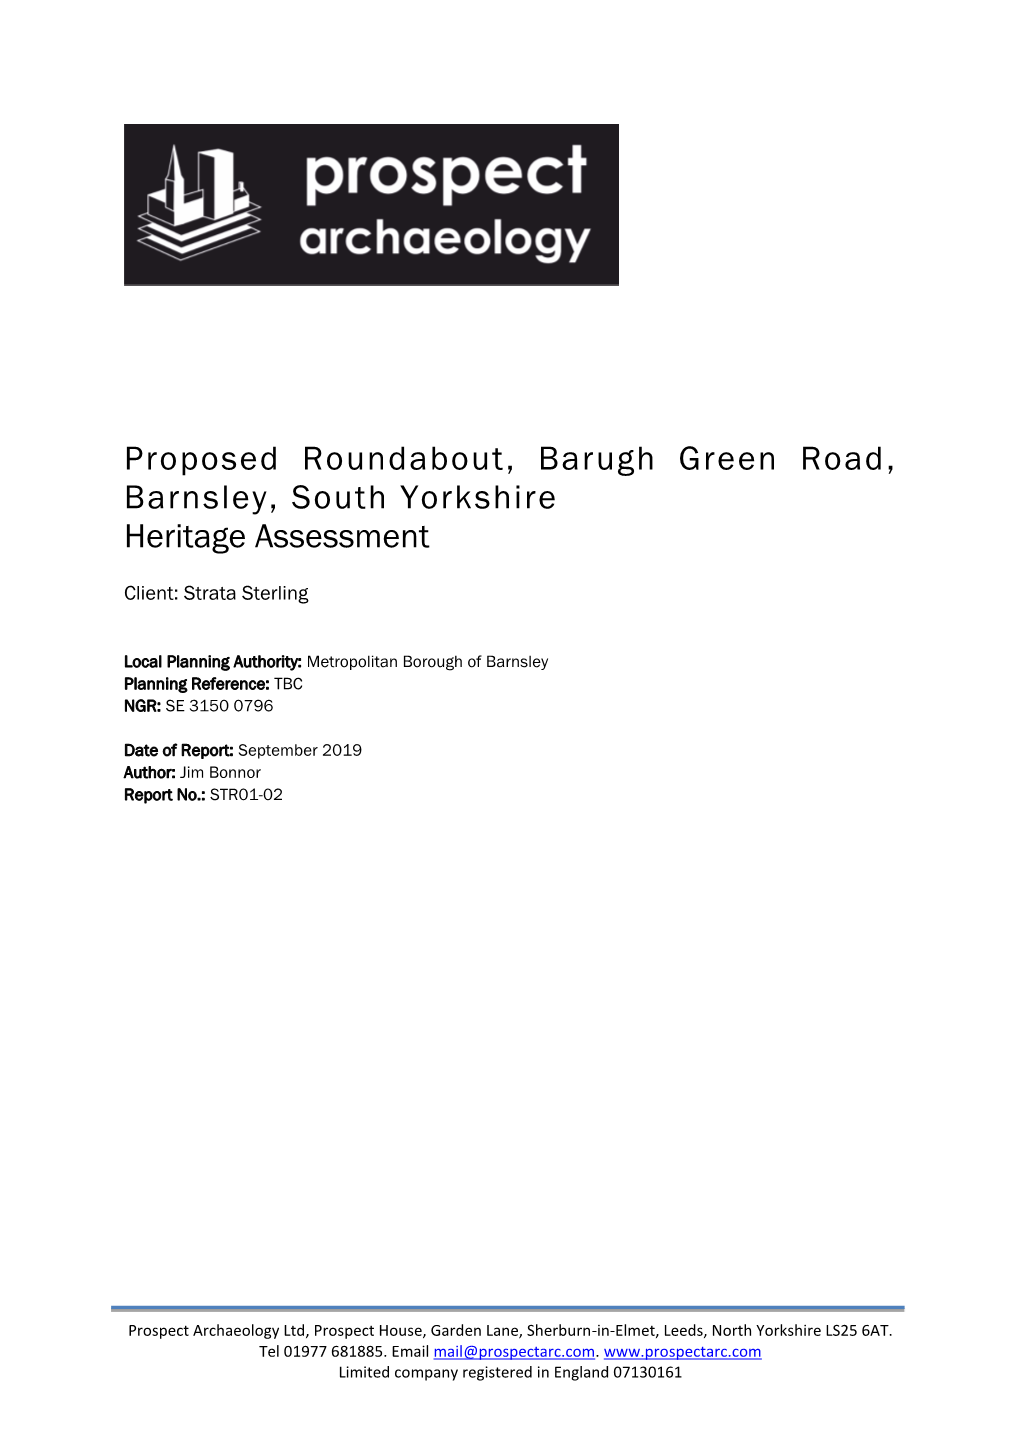 Proposed Roundabout, Barugh Green Road, Barnsley, South Yorkshire Heritage Assessment